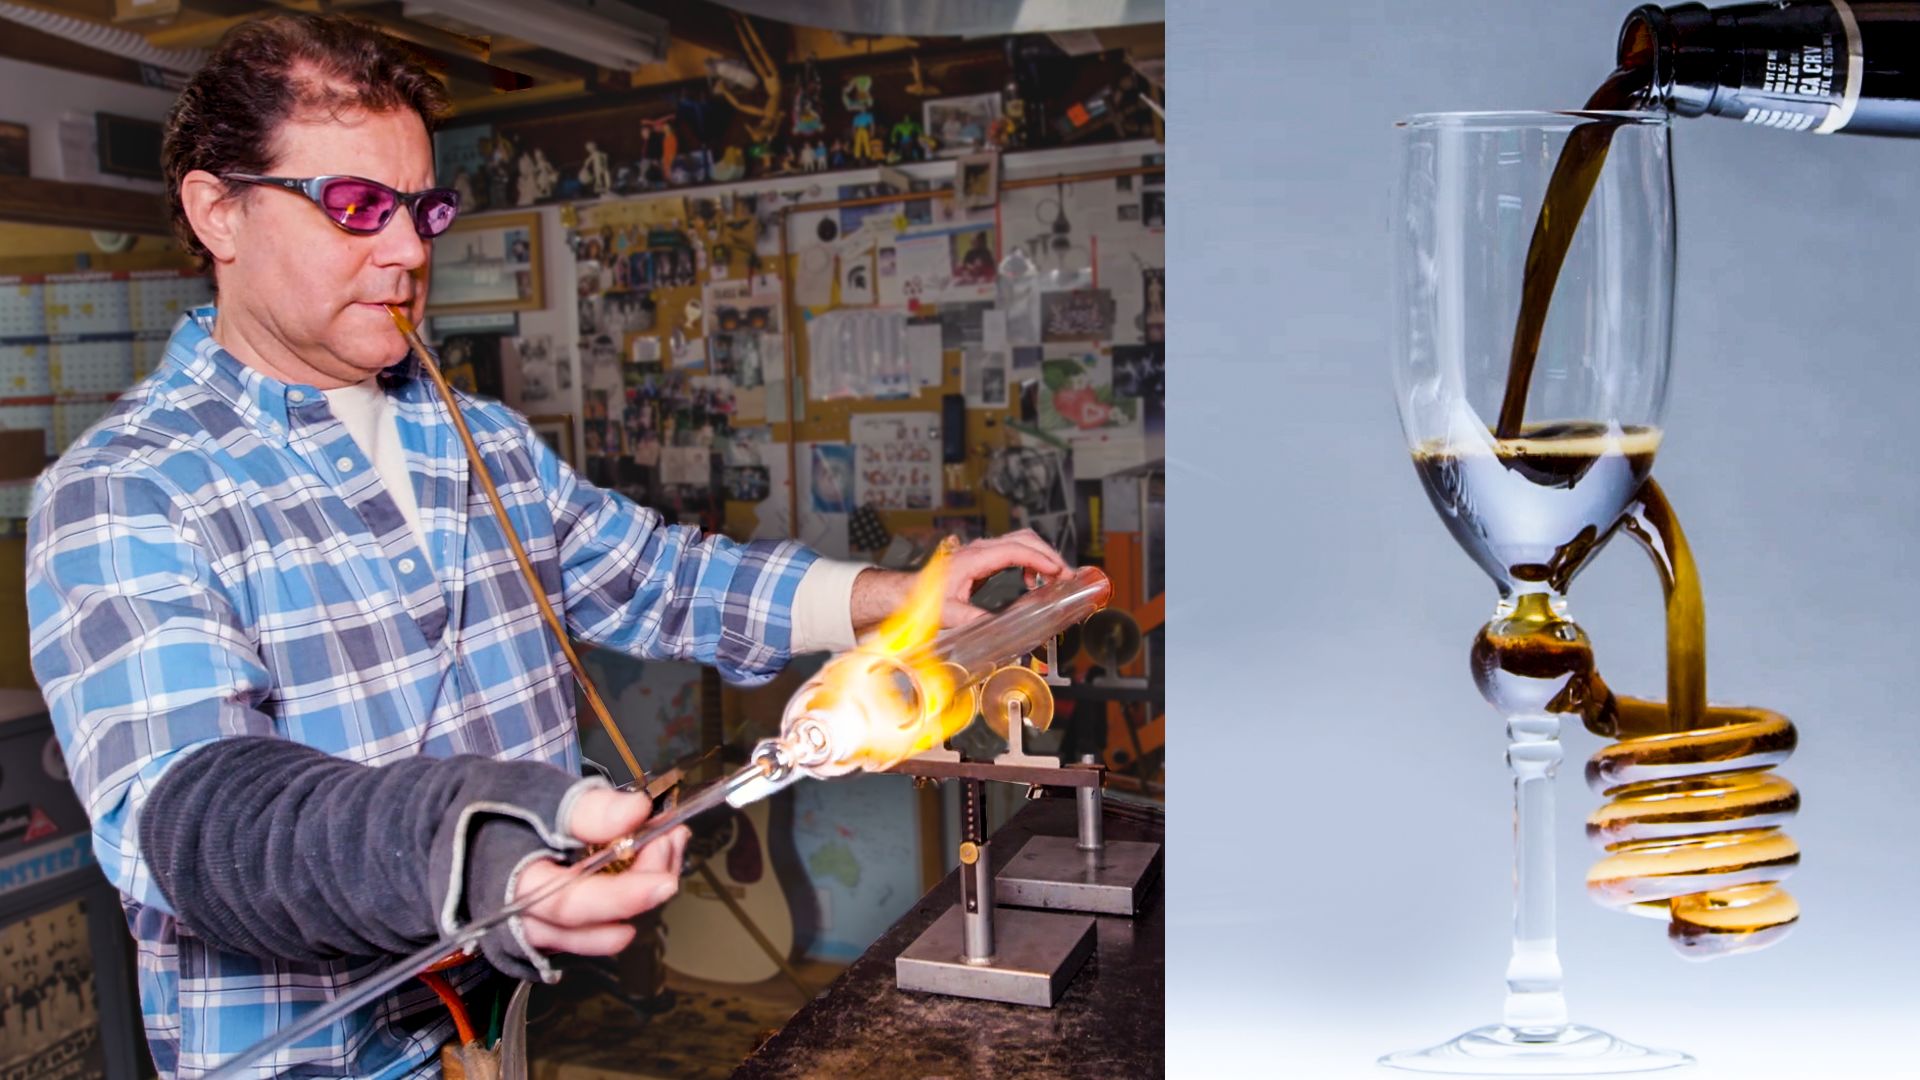 Tim Drier works with scientific glass all day, but what if he took some of those techniques he's perfected for scientific glass and applies them to st